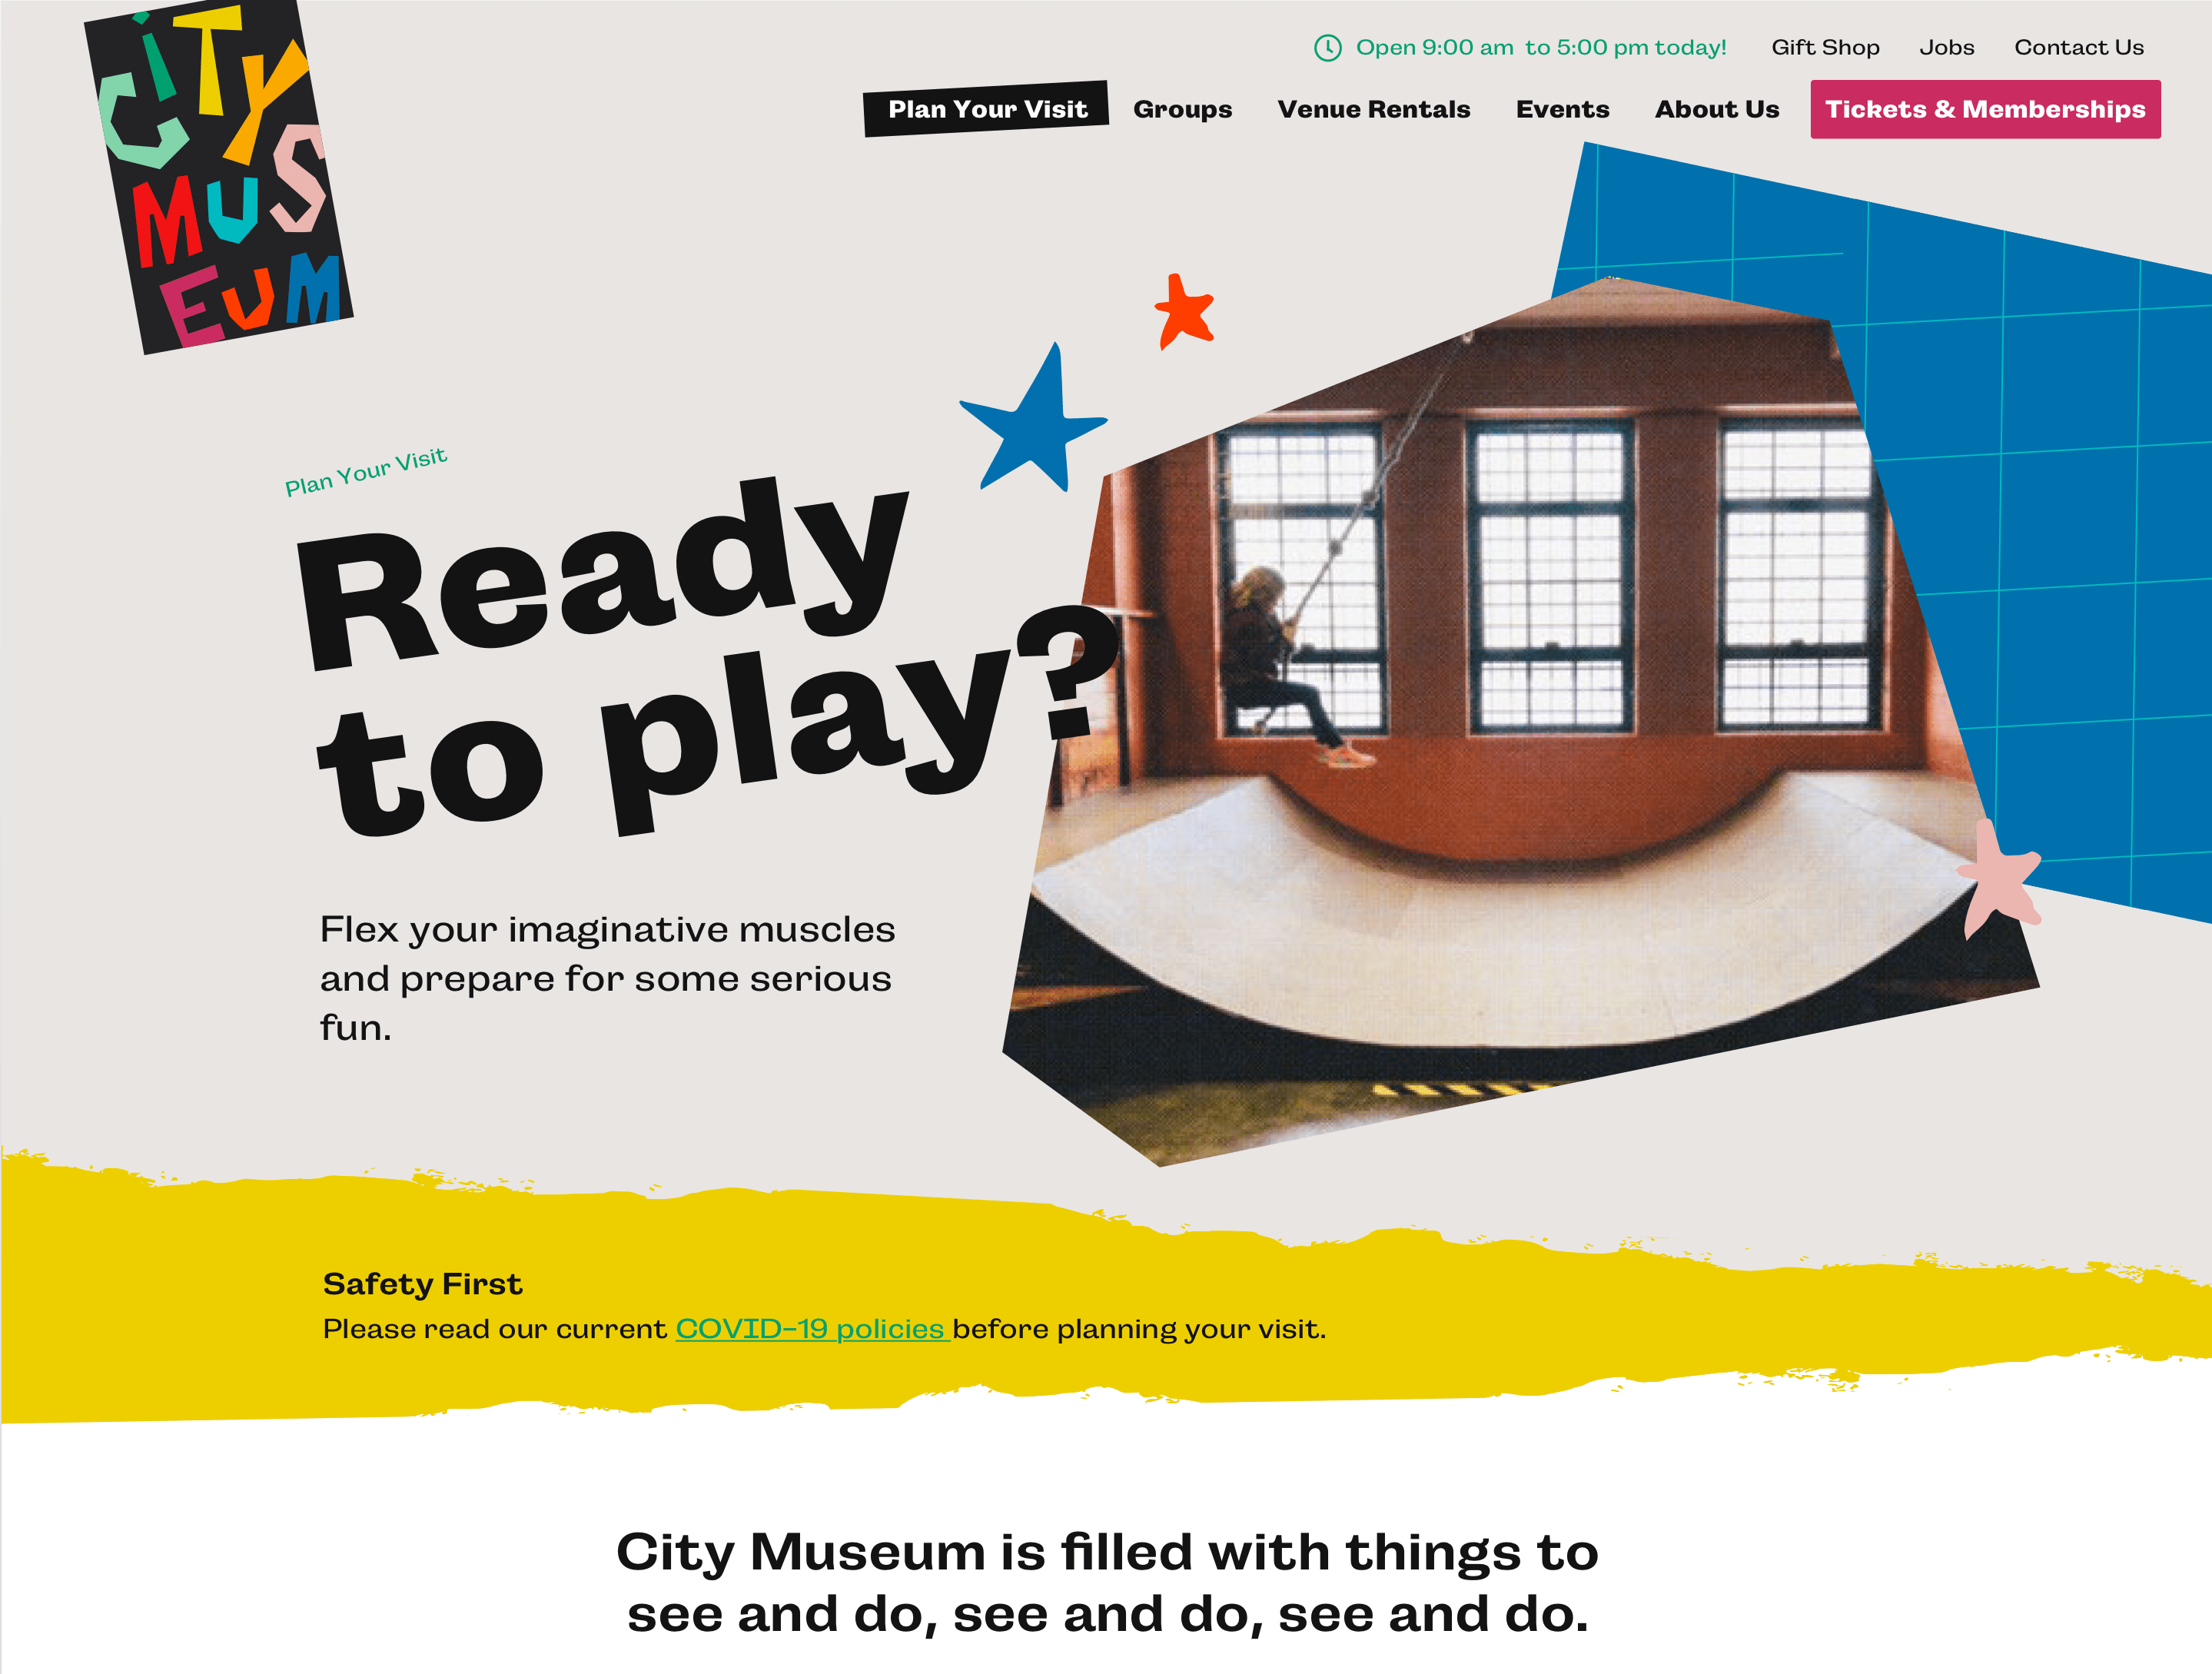 The "Plan Your Visit" page of the City Museum website design